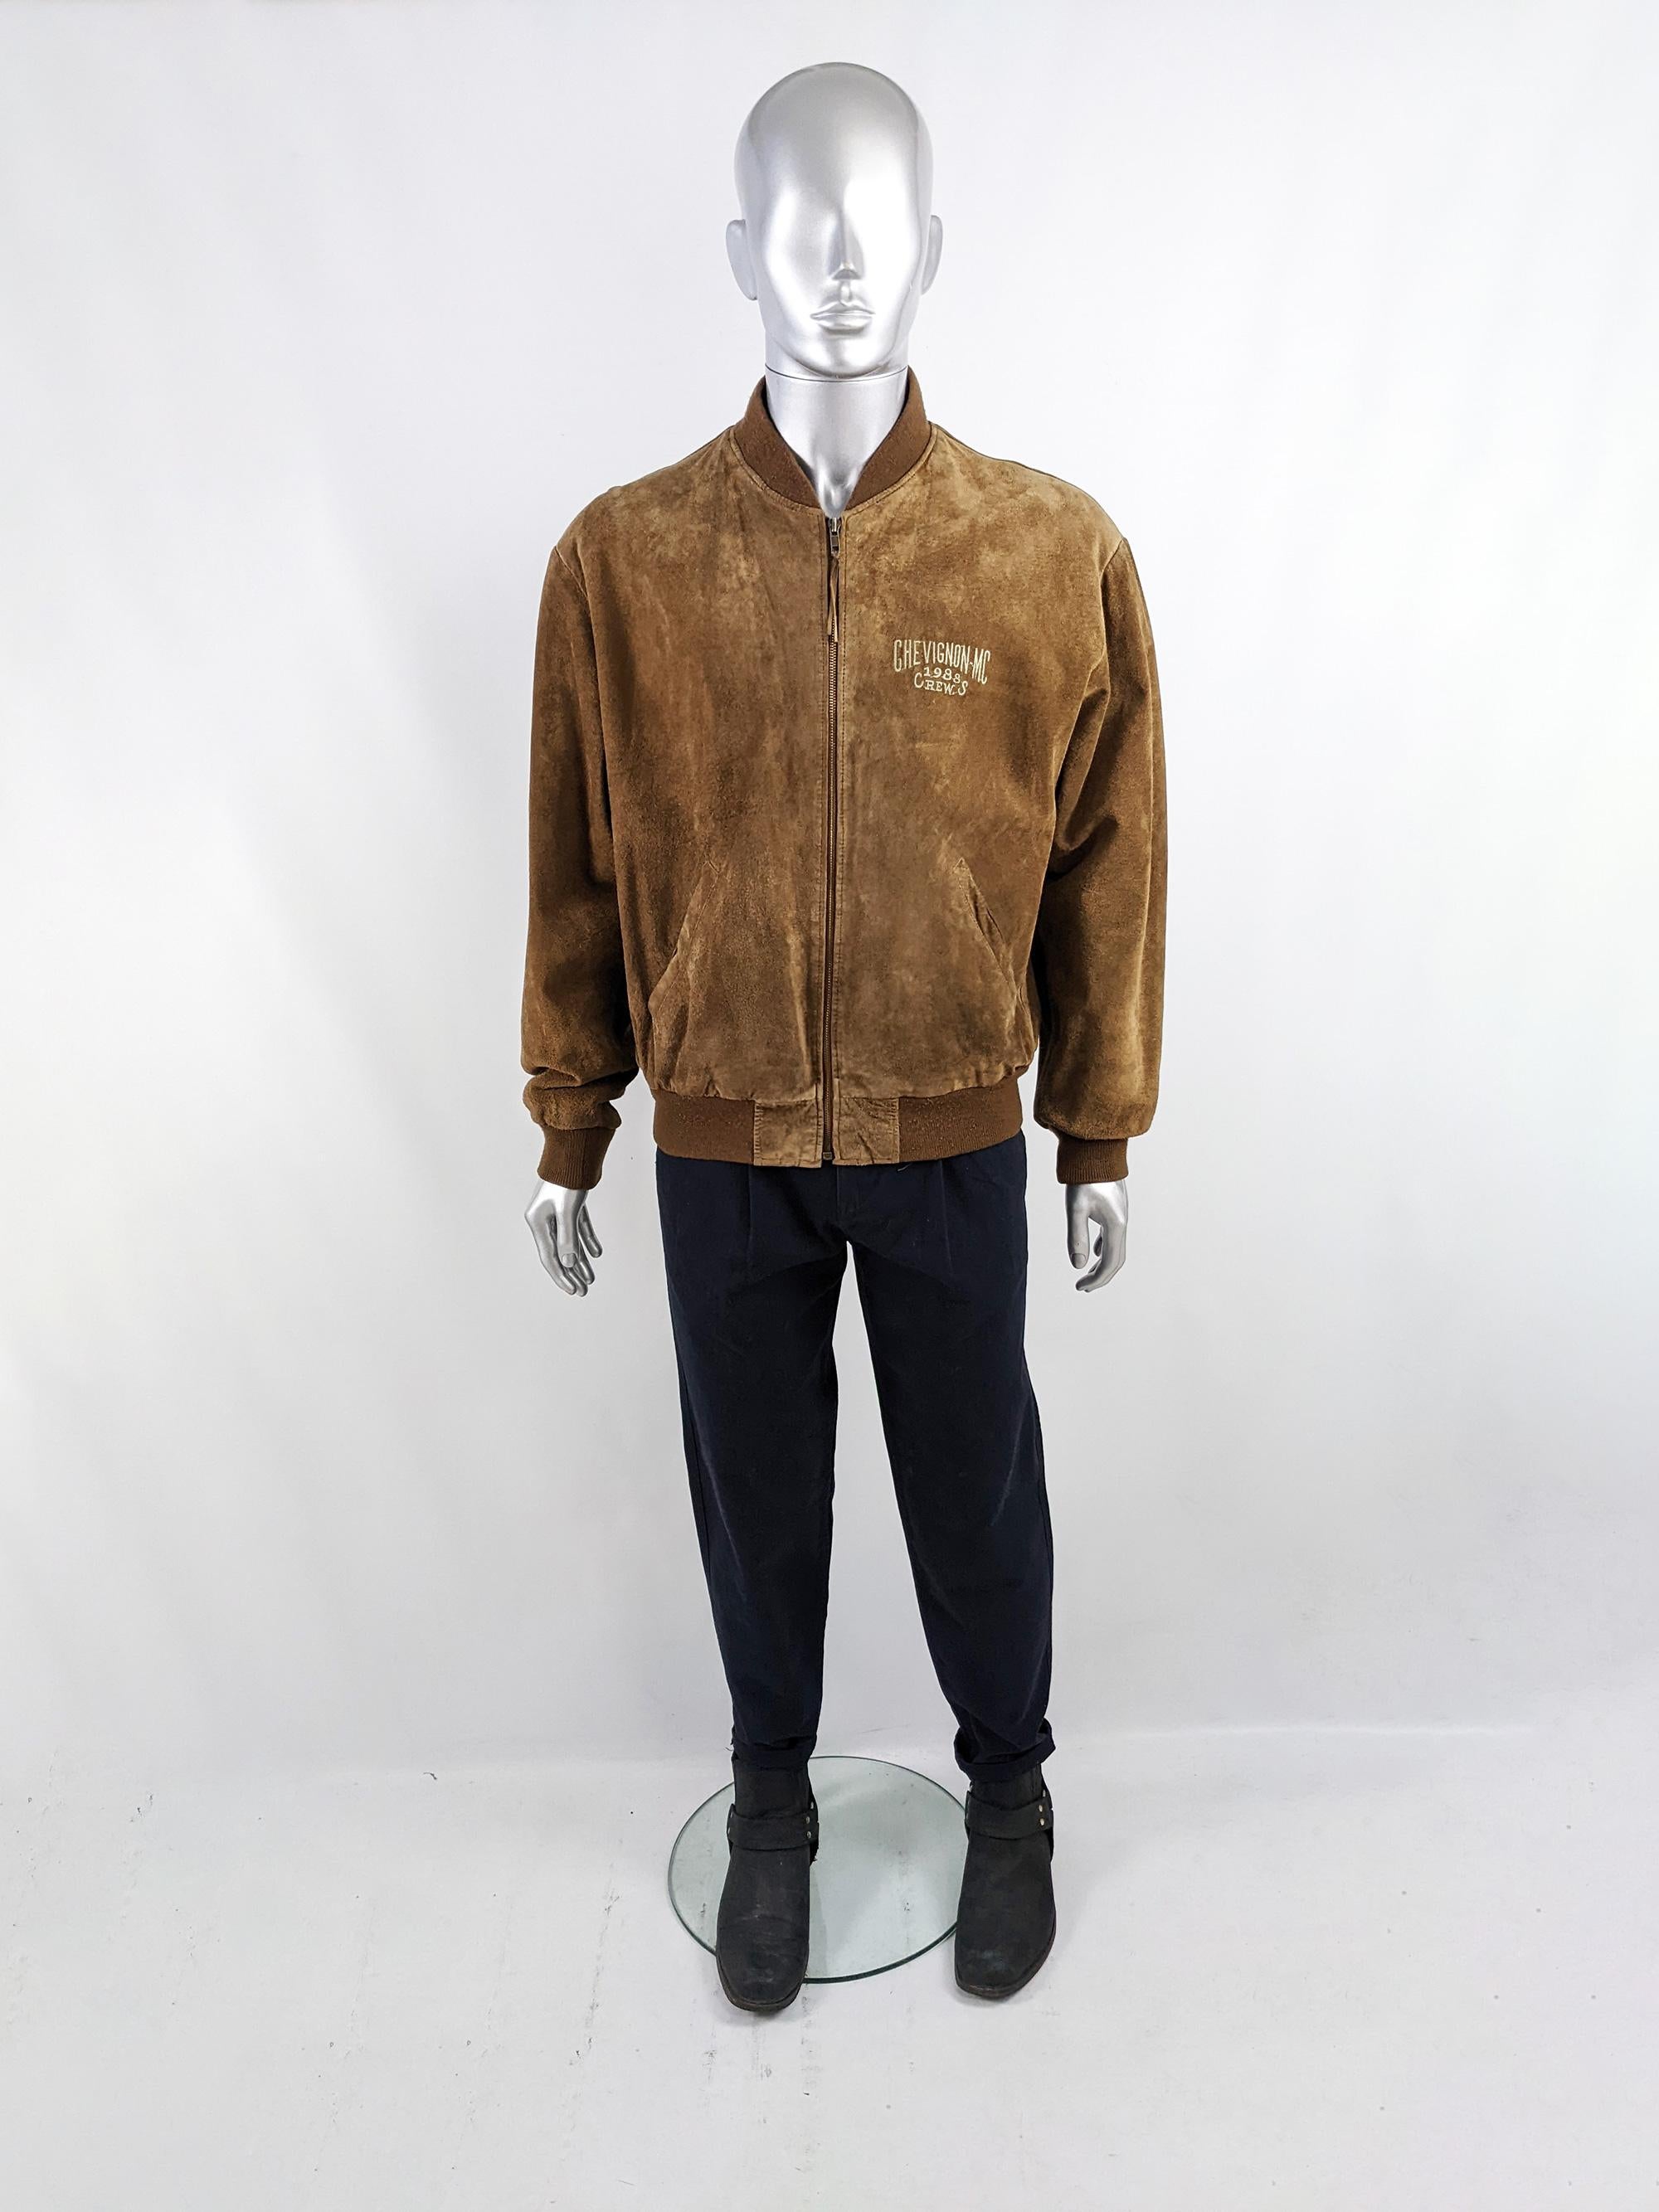 An excellent vintage mens suede jacket from the 80s by cult French designer label, Chevignon. In a luxurious brown suede with spellout embroidery on the front in an aviator style. It has ribbed knit cuffs, hem and collar and a zip front.

Size: